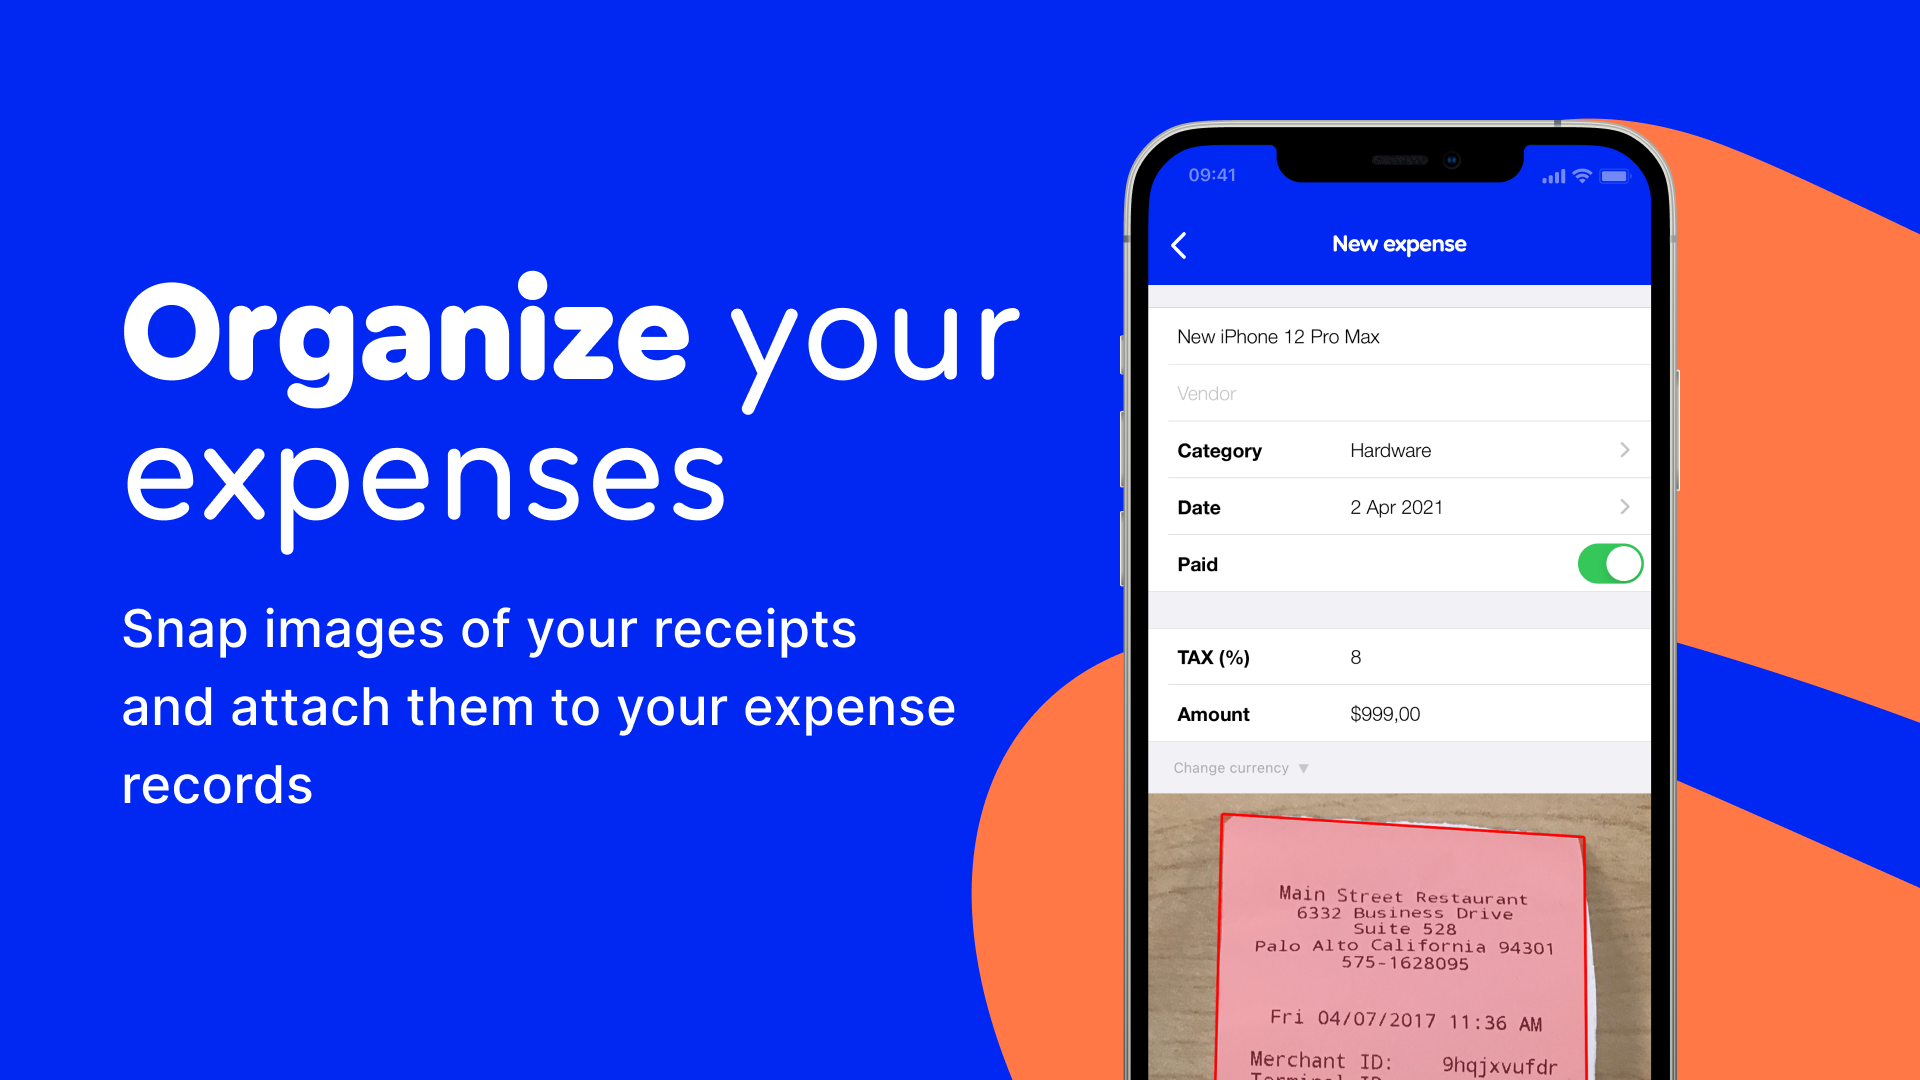 Organize your expenses.